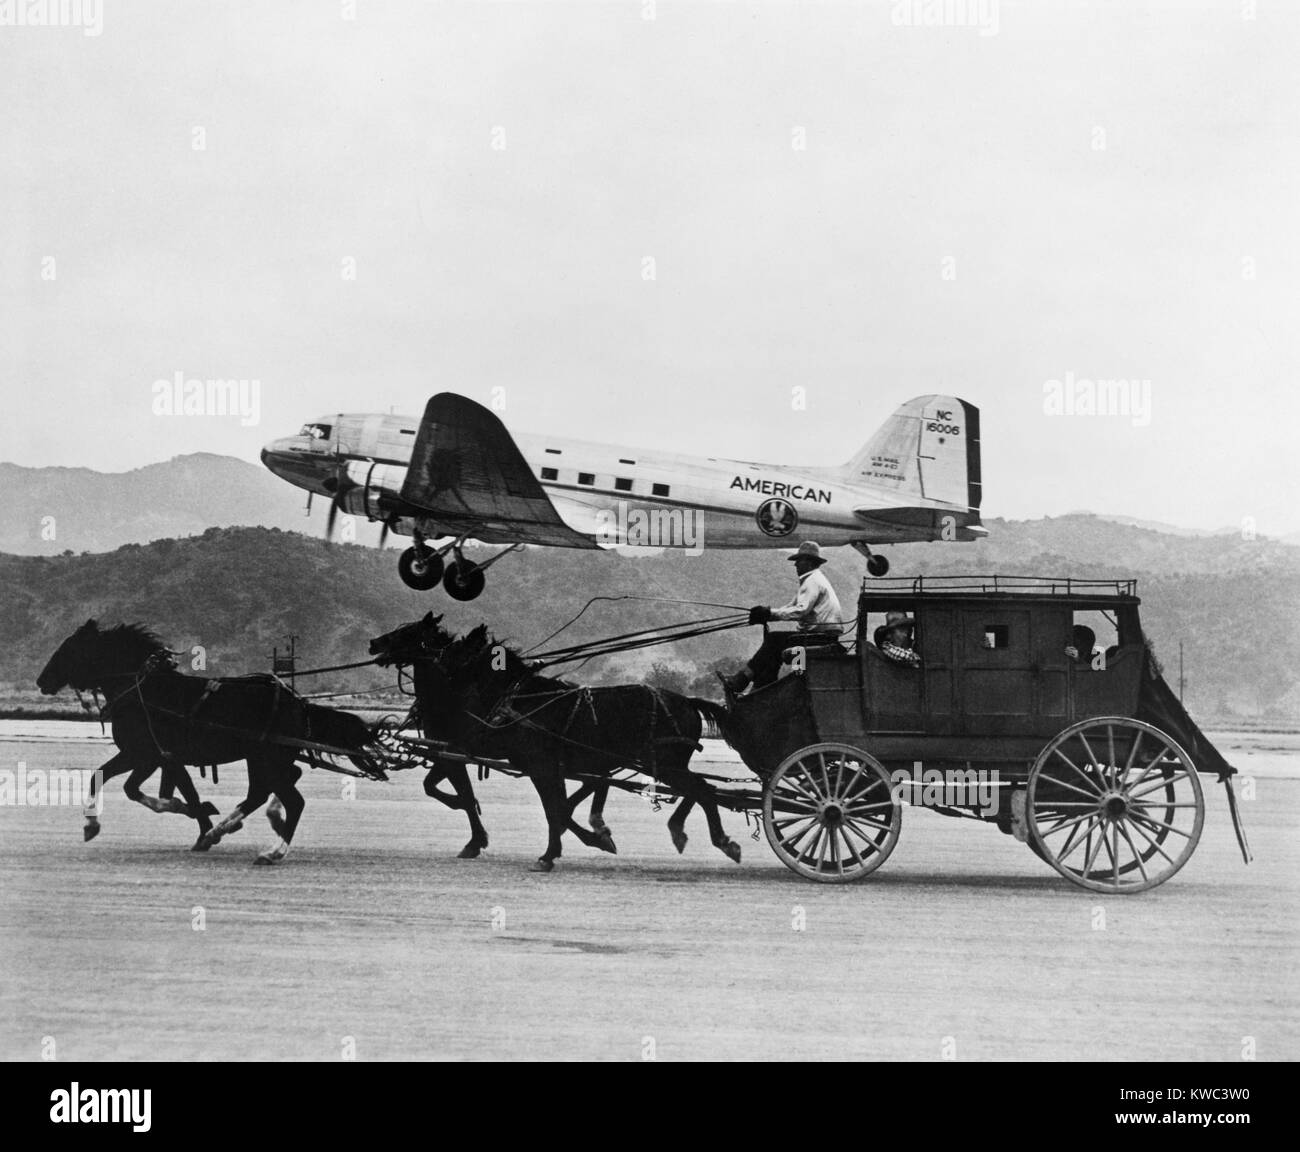 American Airlines DC-3 flying past horse drawn stagecoach. The photo was featured in an American Airlines magazine advertisement in 1949. (BSLOC 2015 14 193) Stock Photo